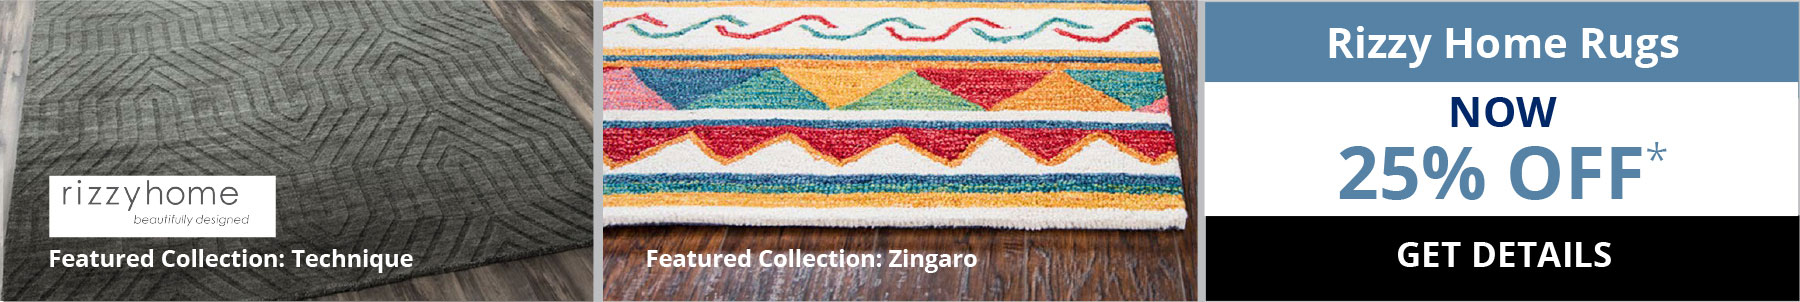 Rizzy Home Rugs. Now 25% Off*. Get Details.